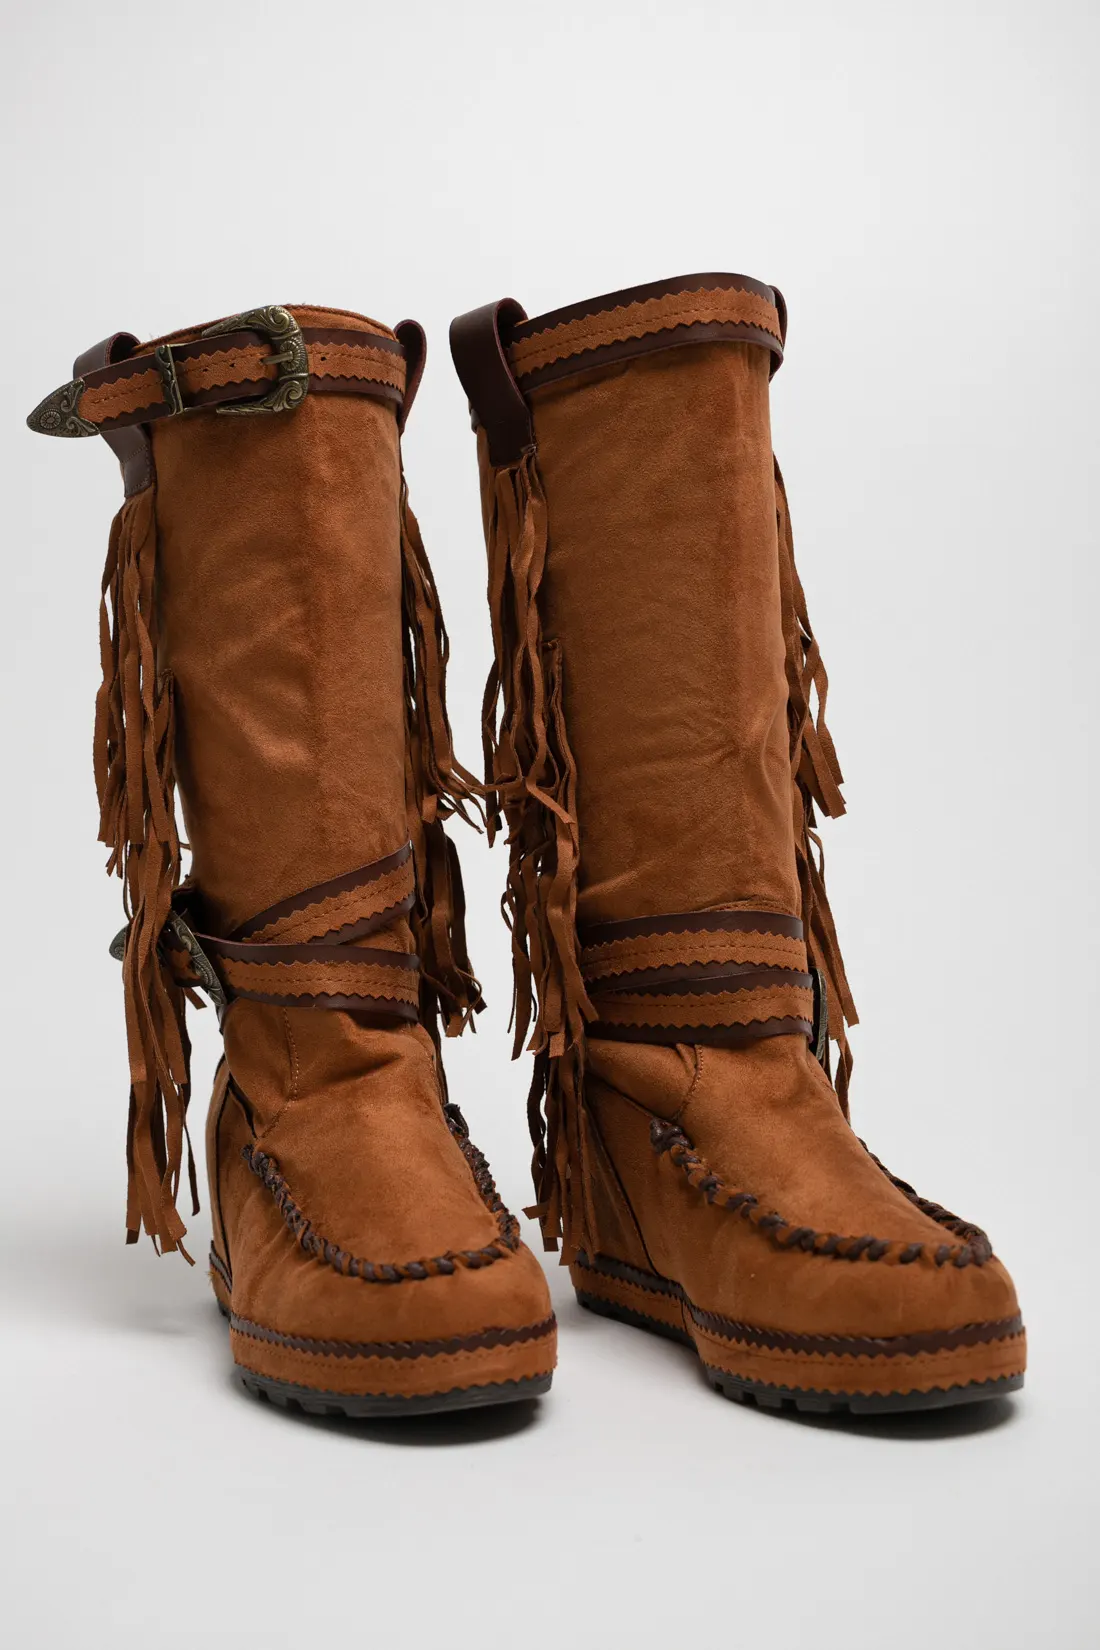 INDIANINI HONTE HIGH BOOT - CAMEL